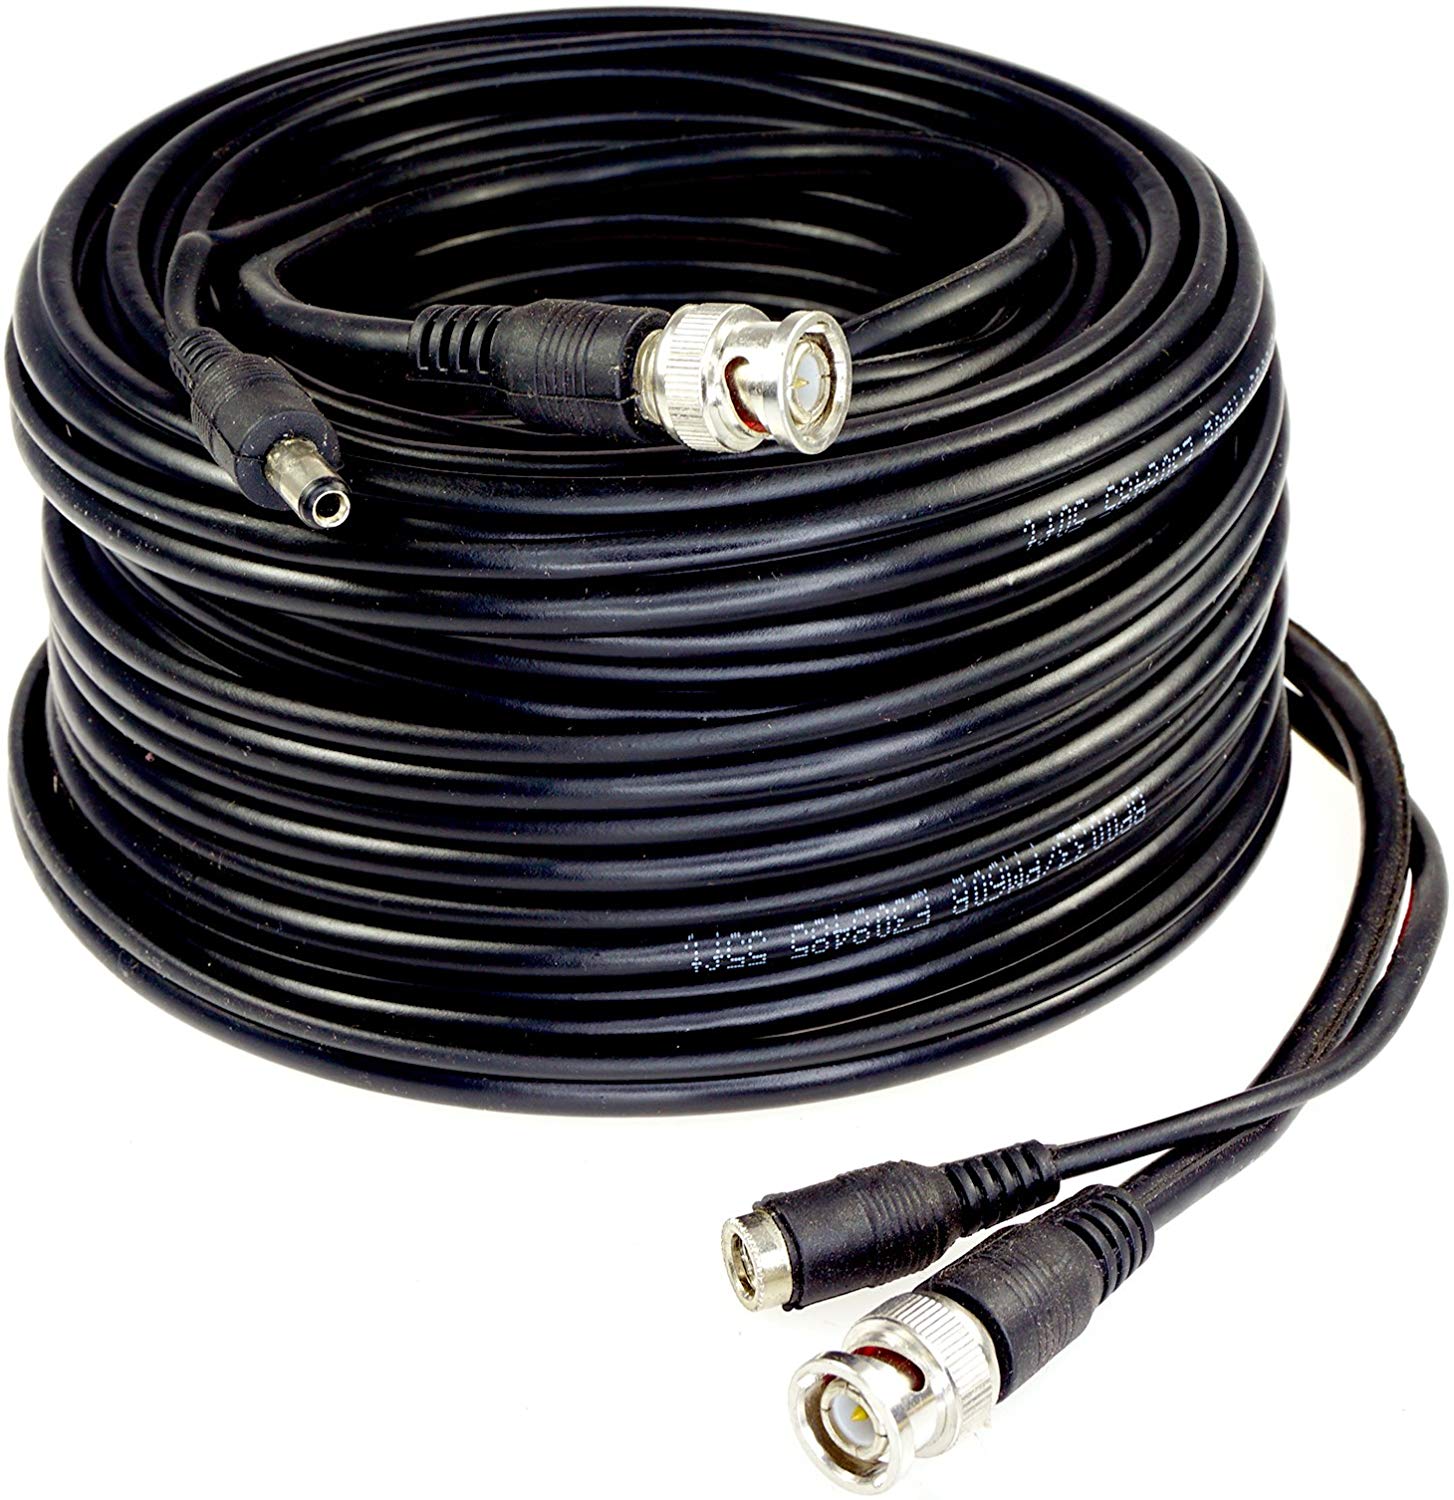 BNC RG59 CCTV 8 x 25FT Premade Security Camera Cable power video wire Black 